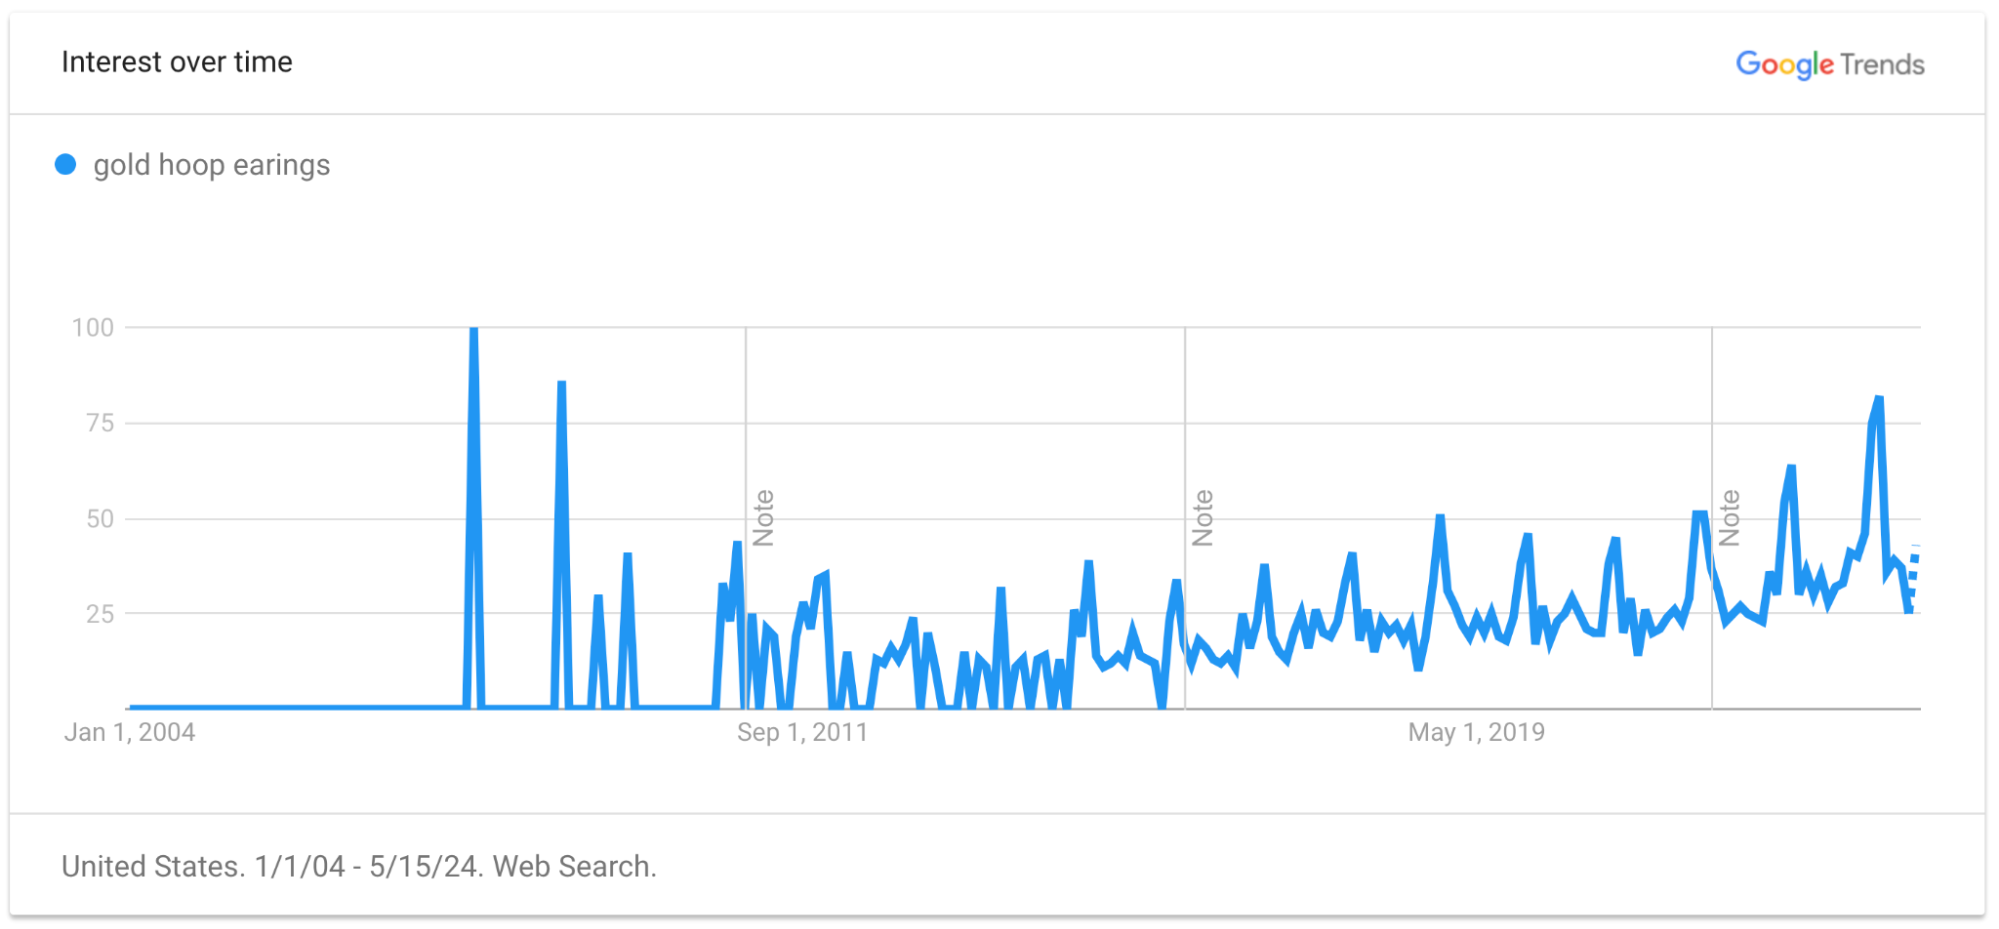 Google Trends graph shows increasing search volume for the term “gold hoop earrings” with spikes around the festive season